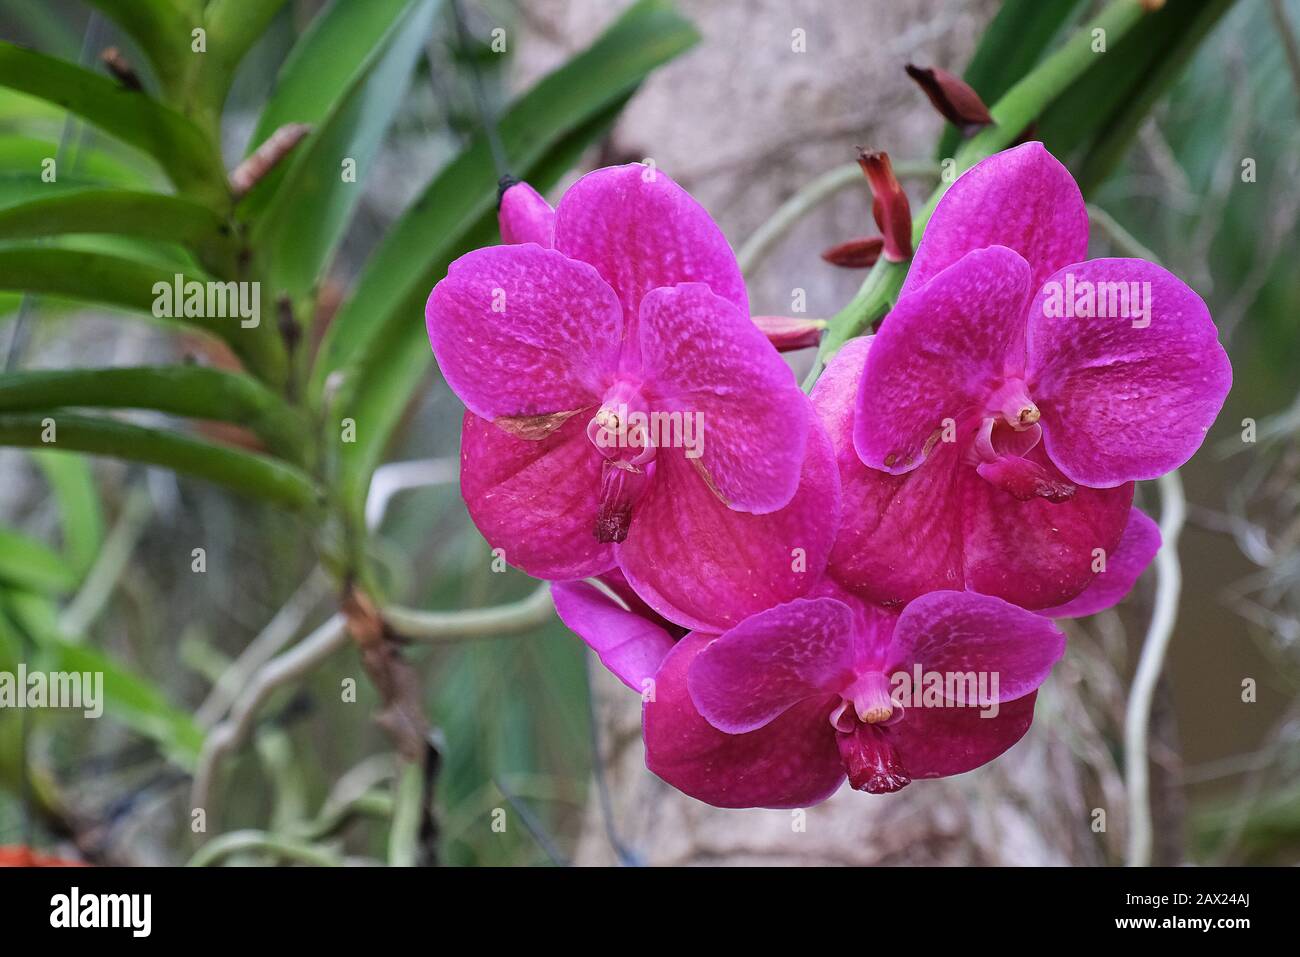 Pink/mauve Vanda orchid against green leaves and tree trunk Stock Photo